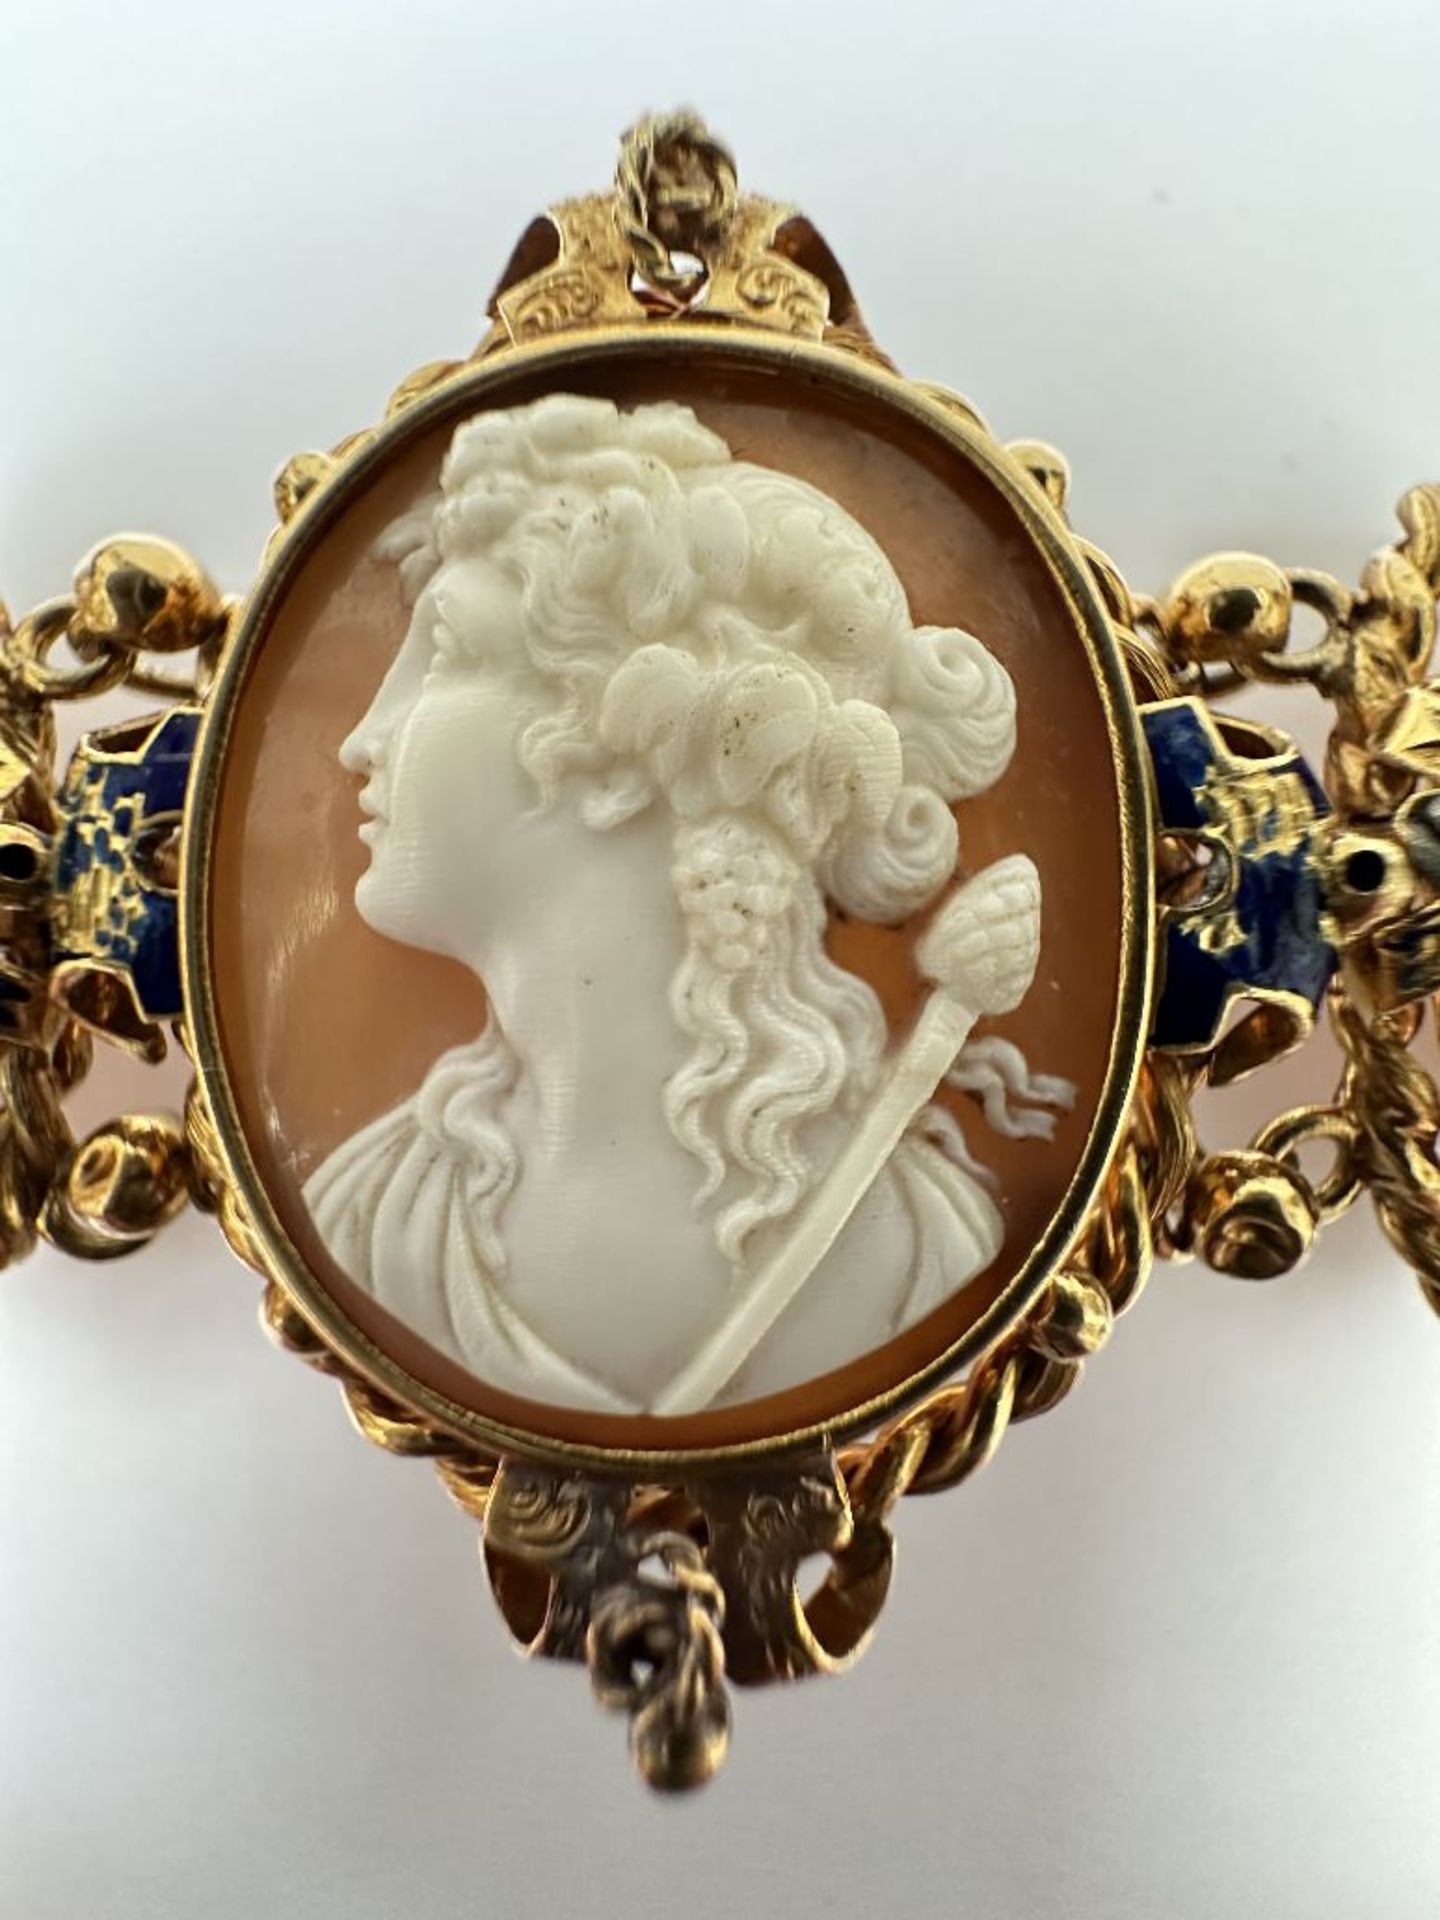 Louis-Philippe gold bracelet with three cameos - Image 4 of 6